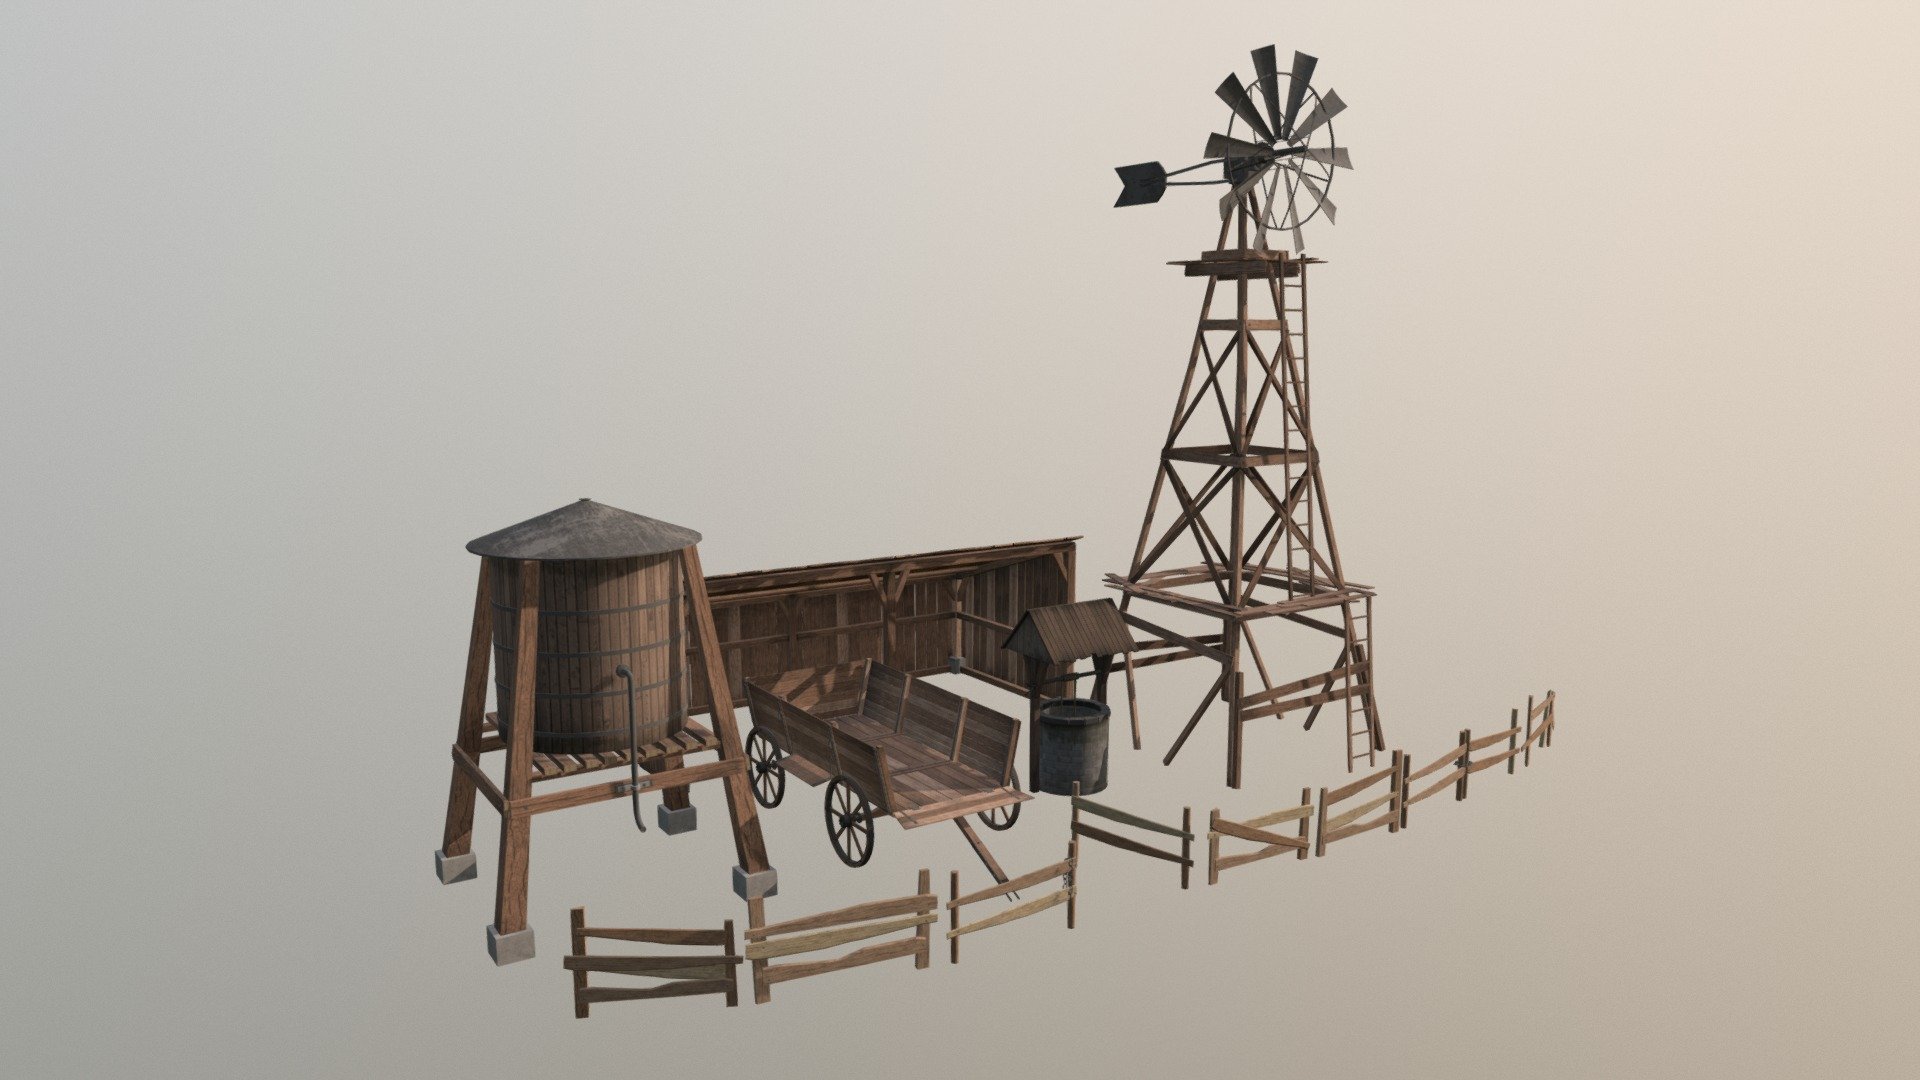 A close up view of all big props that are part of the &ldquo;Farm Assets